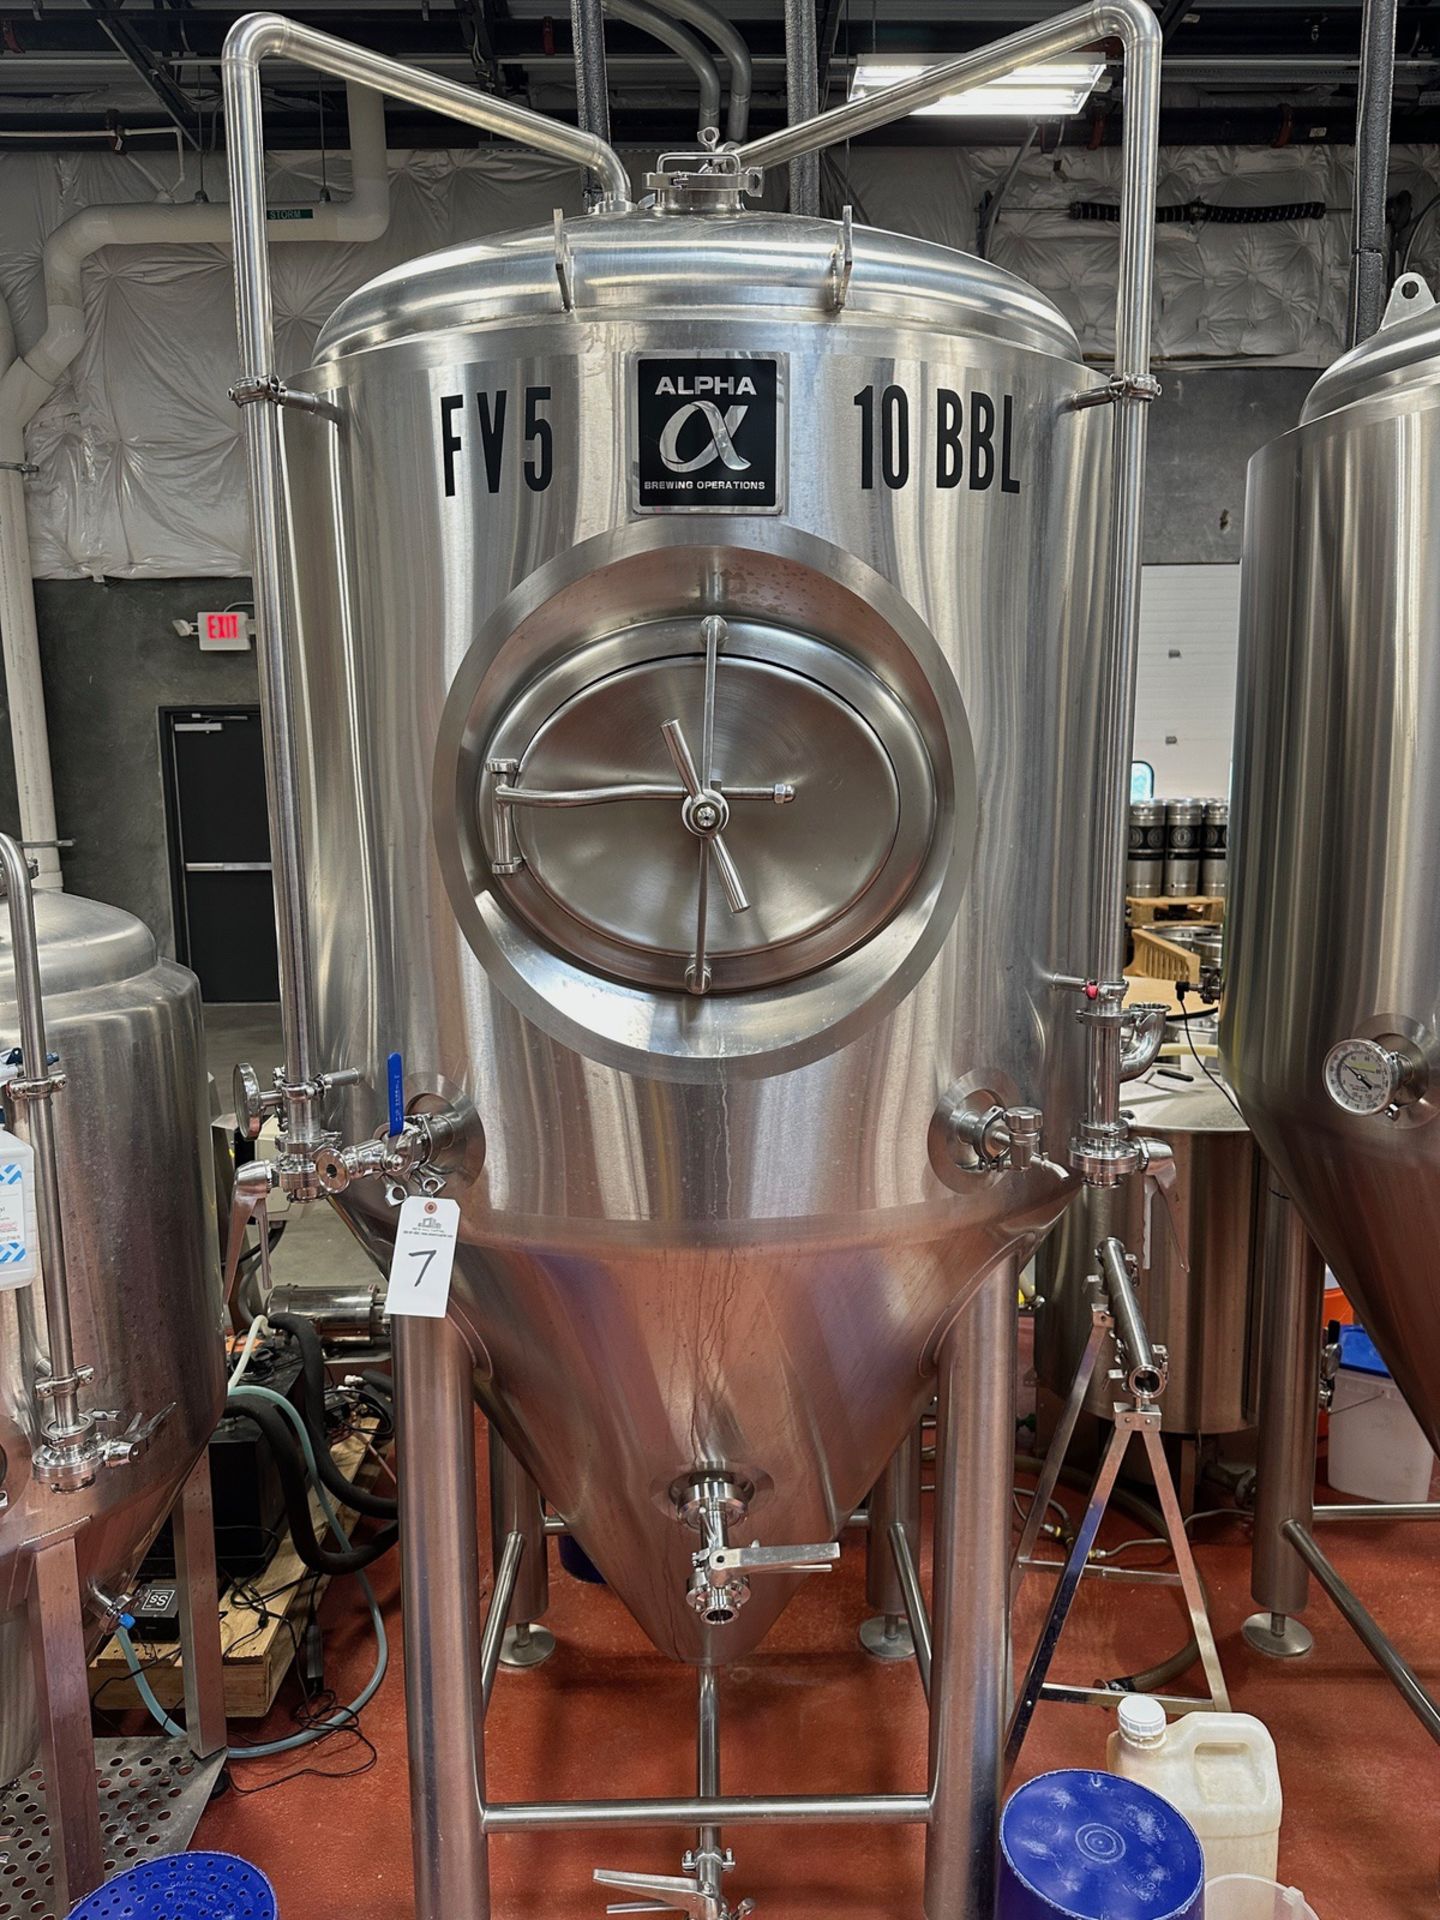 2018 Alpha 10 BBL Stainless Steel Uni-Tank - Cone Bottom, Glycol Jacketed, Manway, | Rig Fee $750